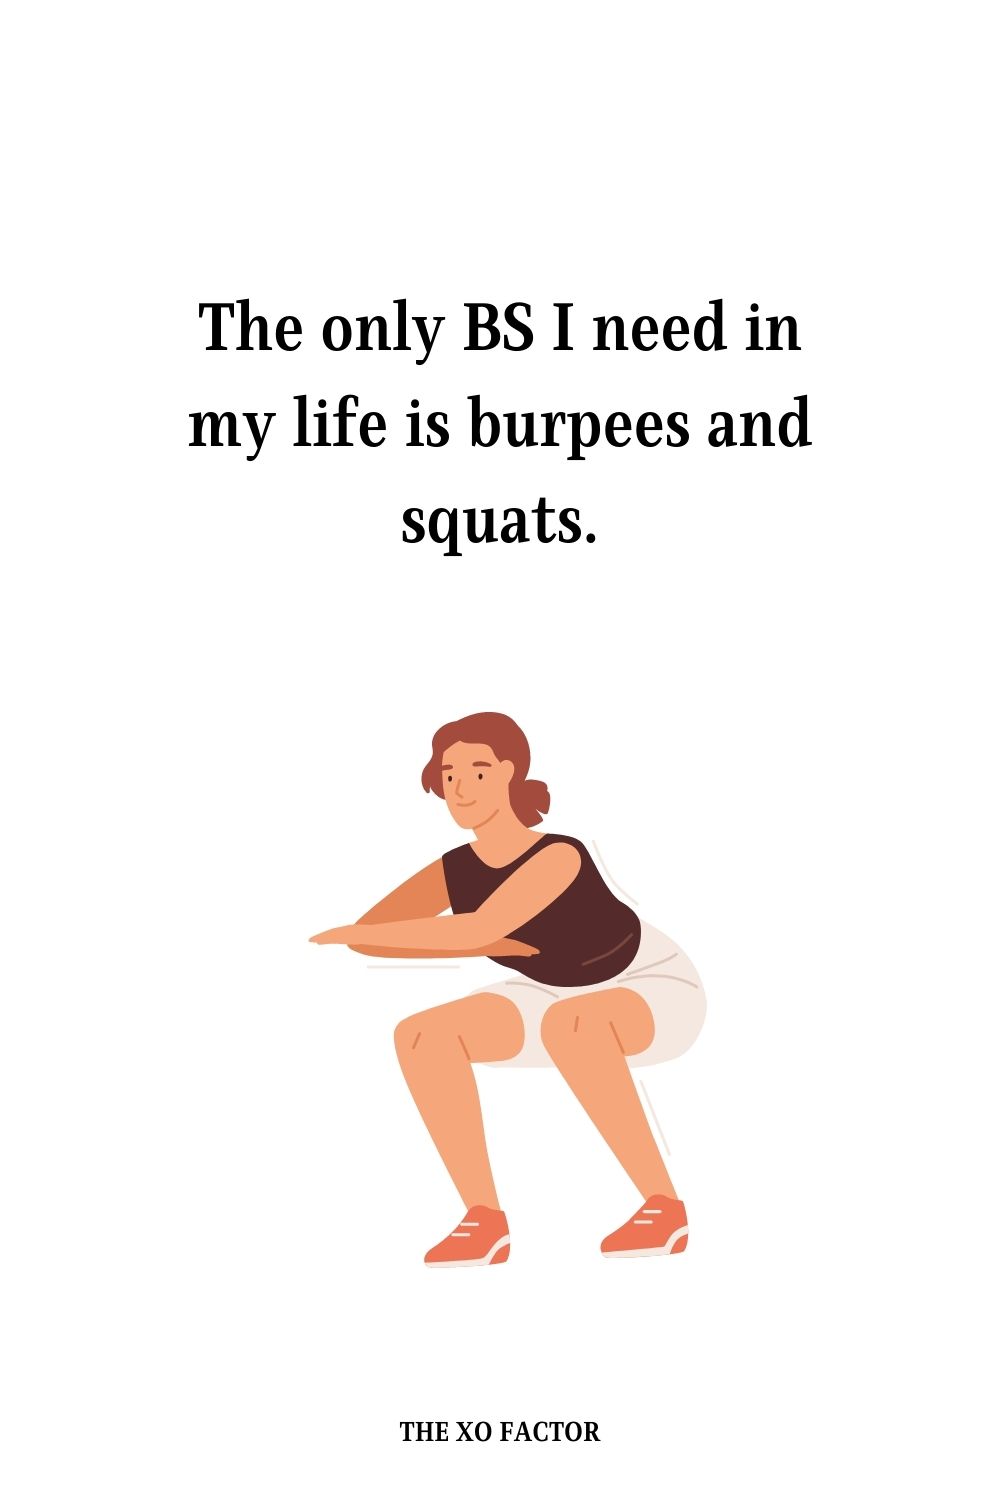 The only BS I need in my life is burpees and squats.